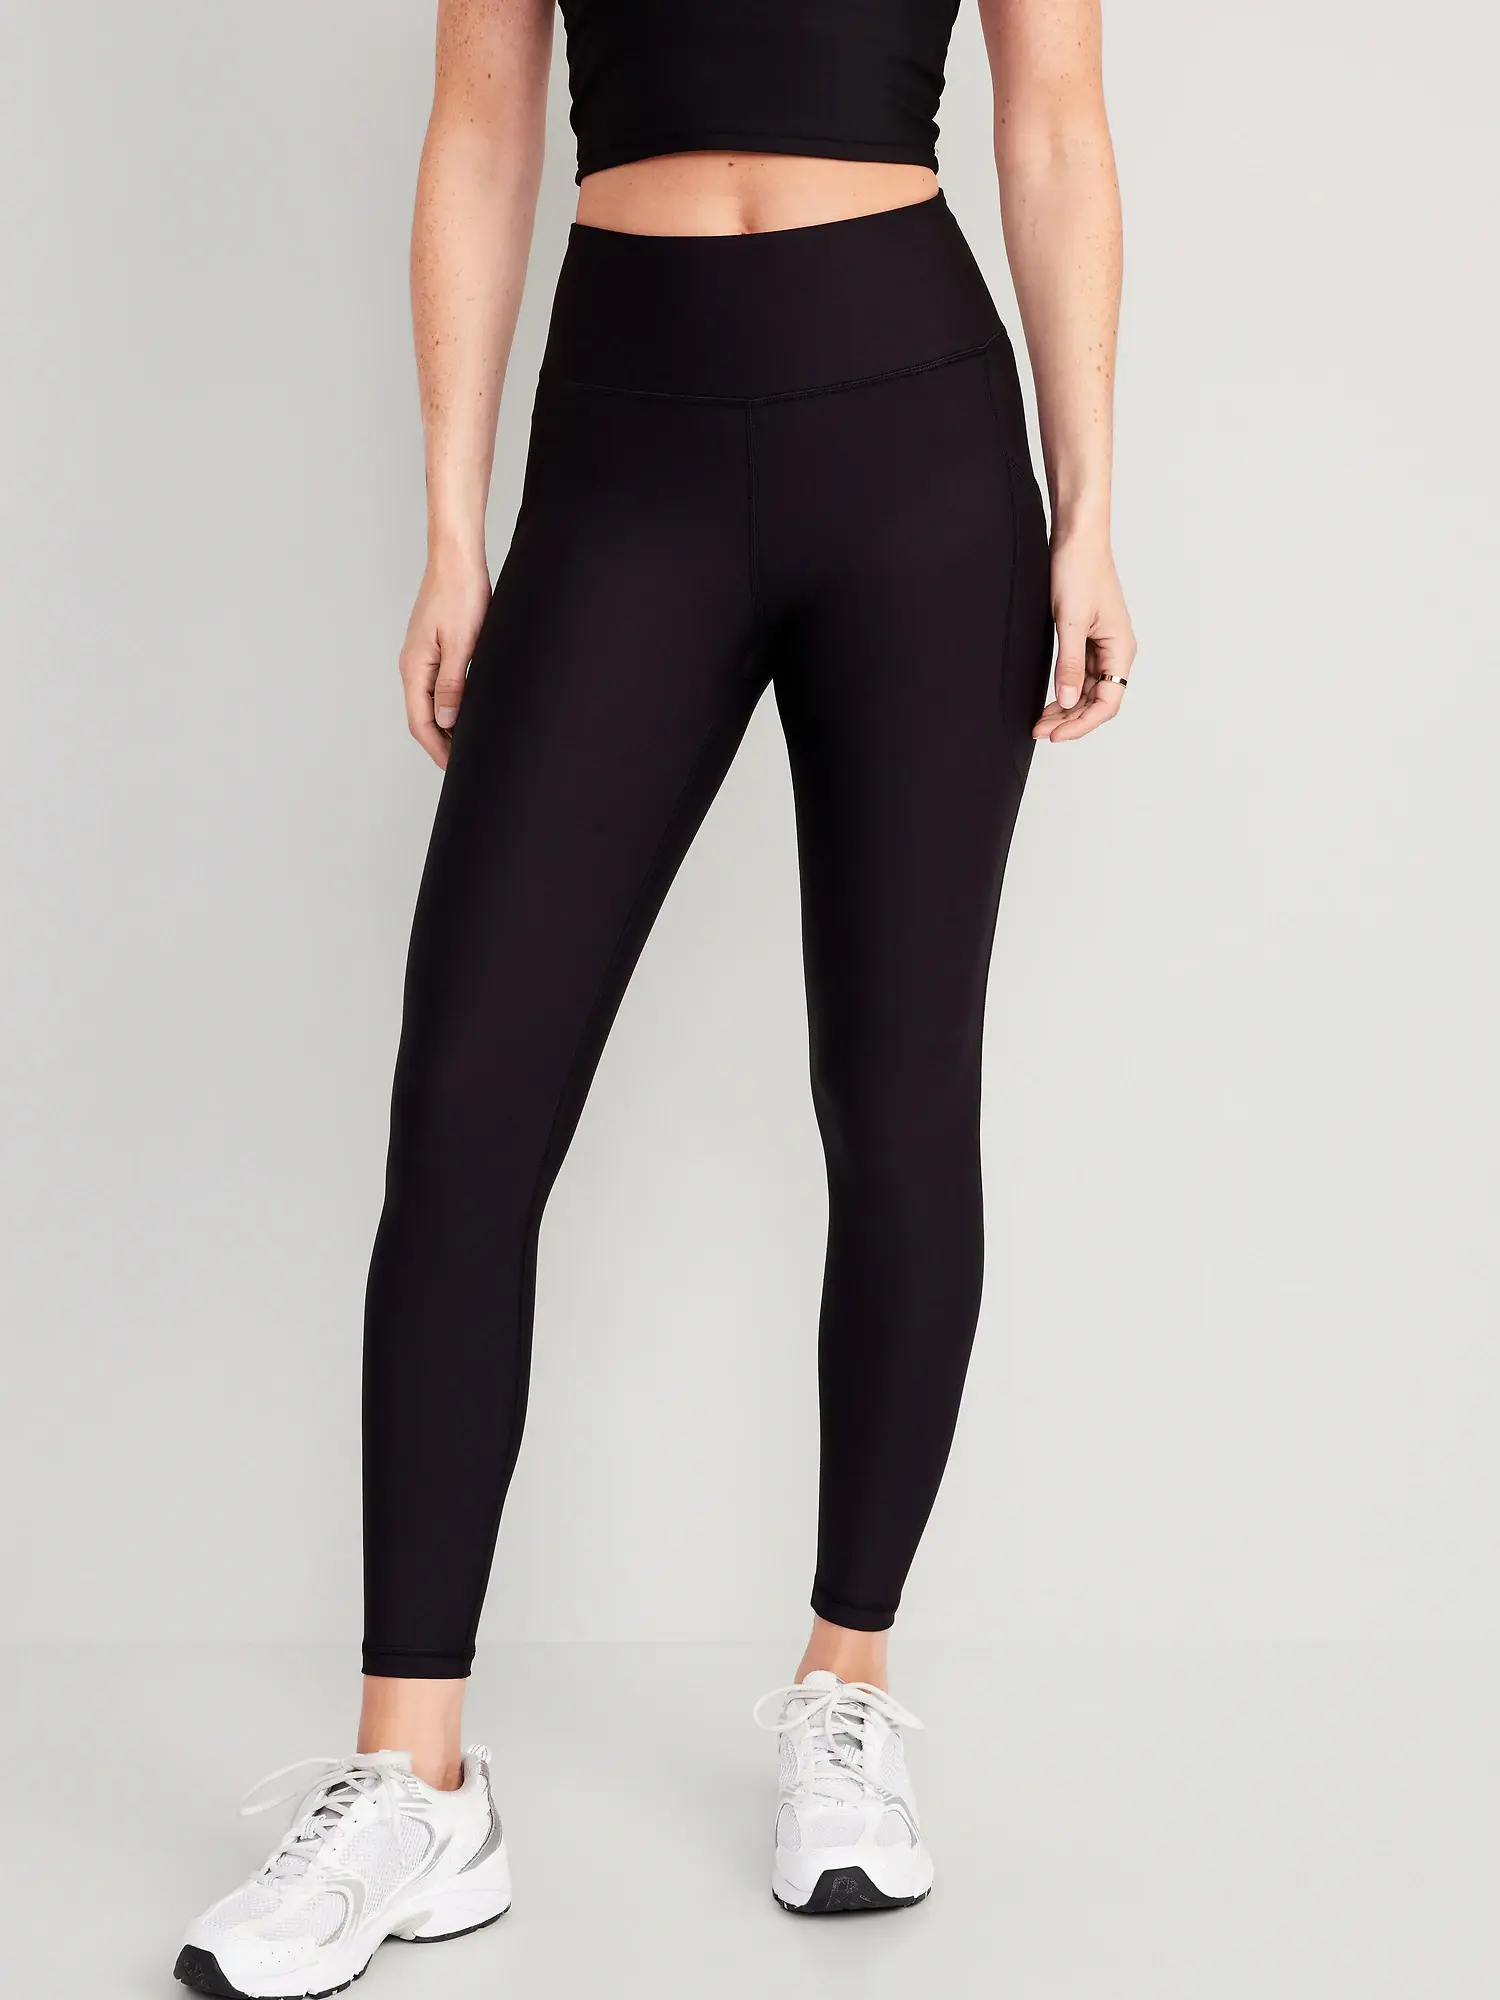 Old Navy High-Waisted PowerSoft 7/8 Leggings black. 1